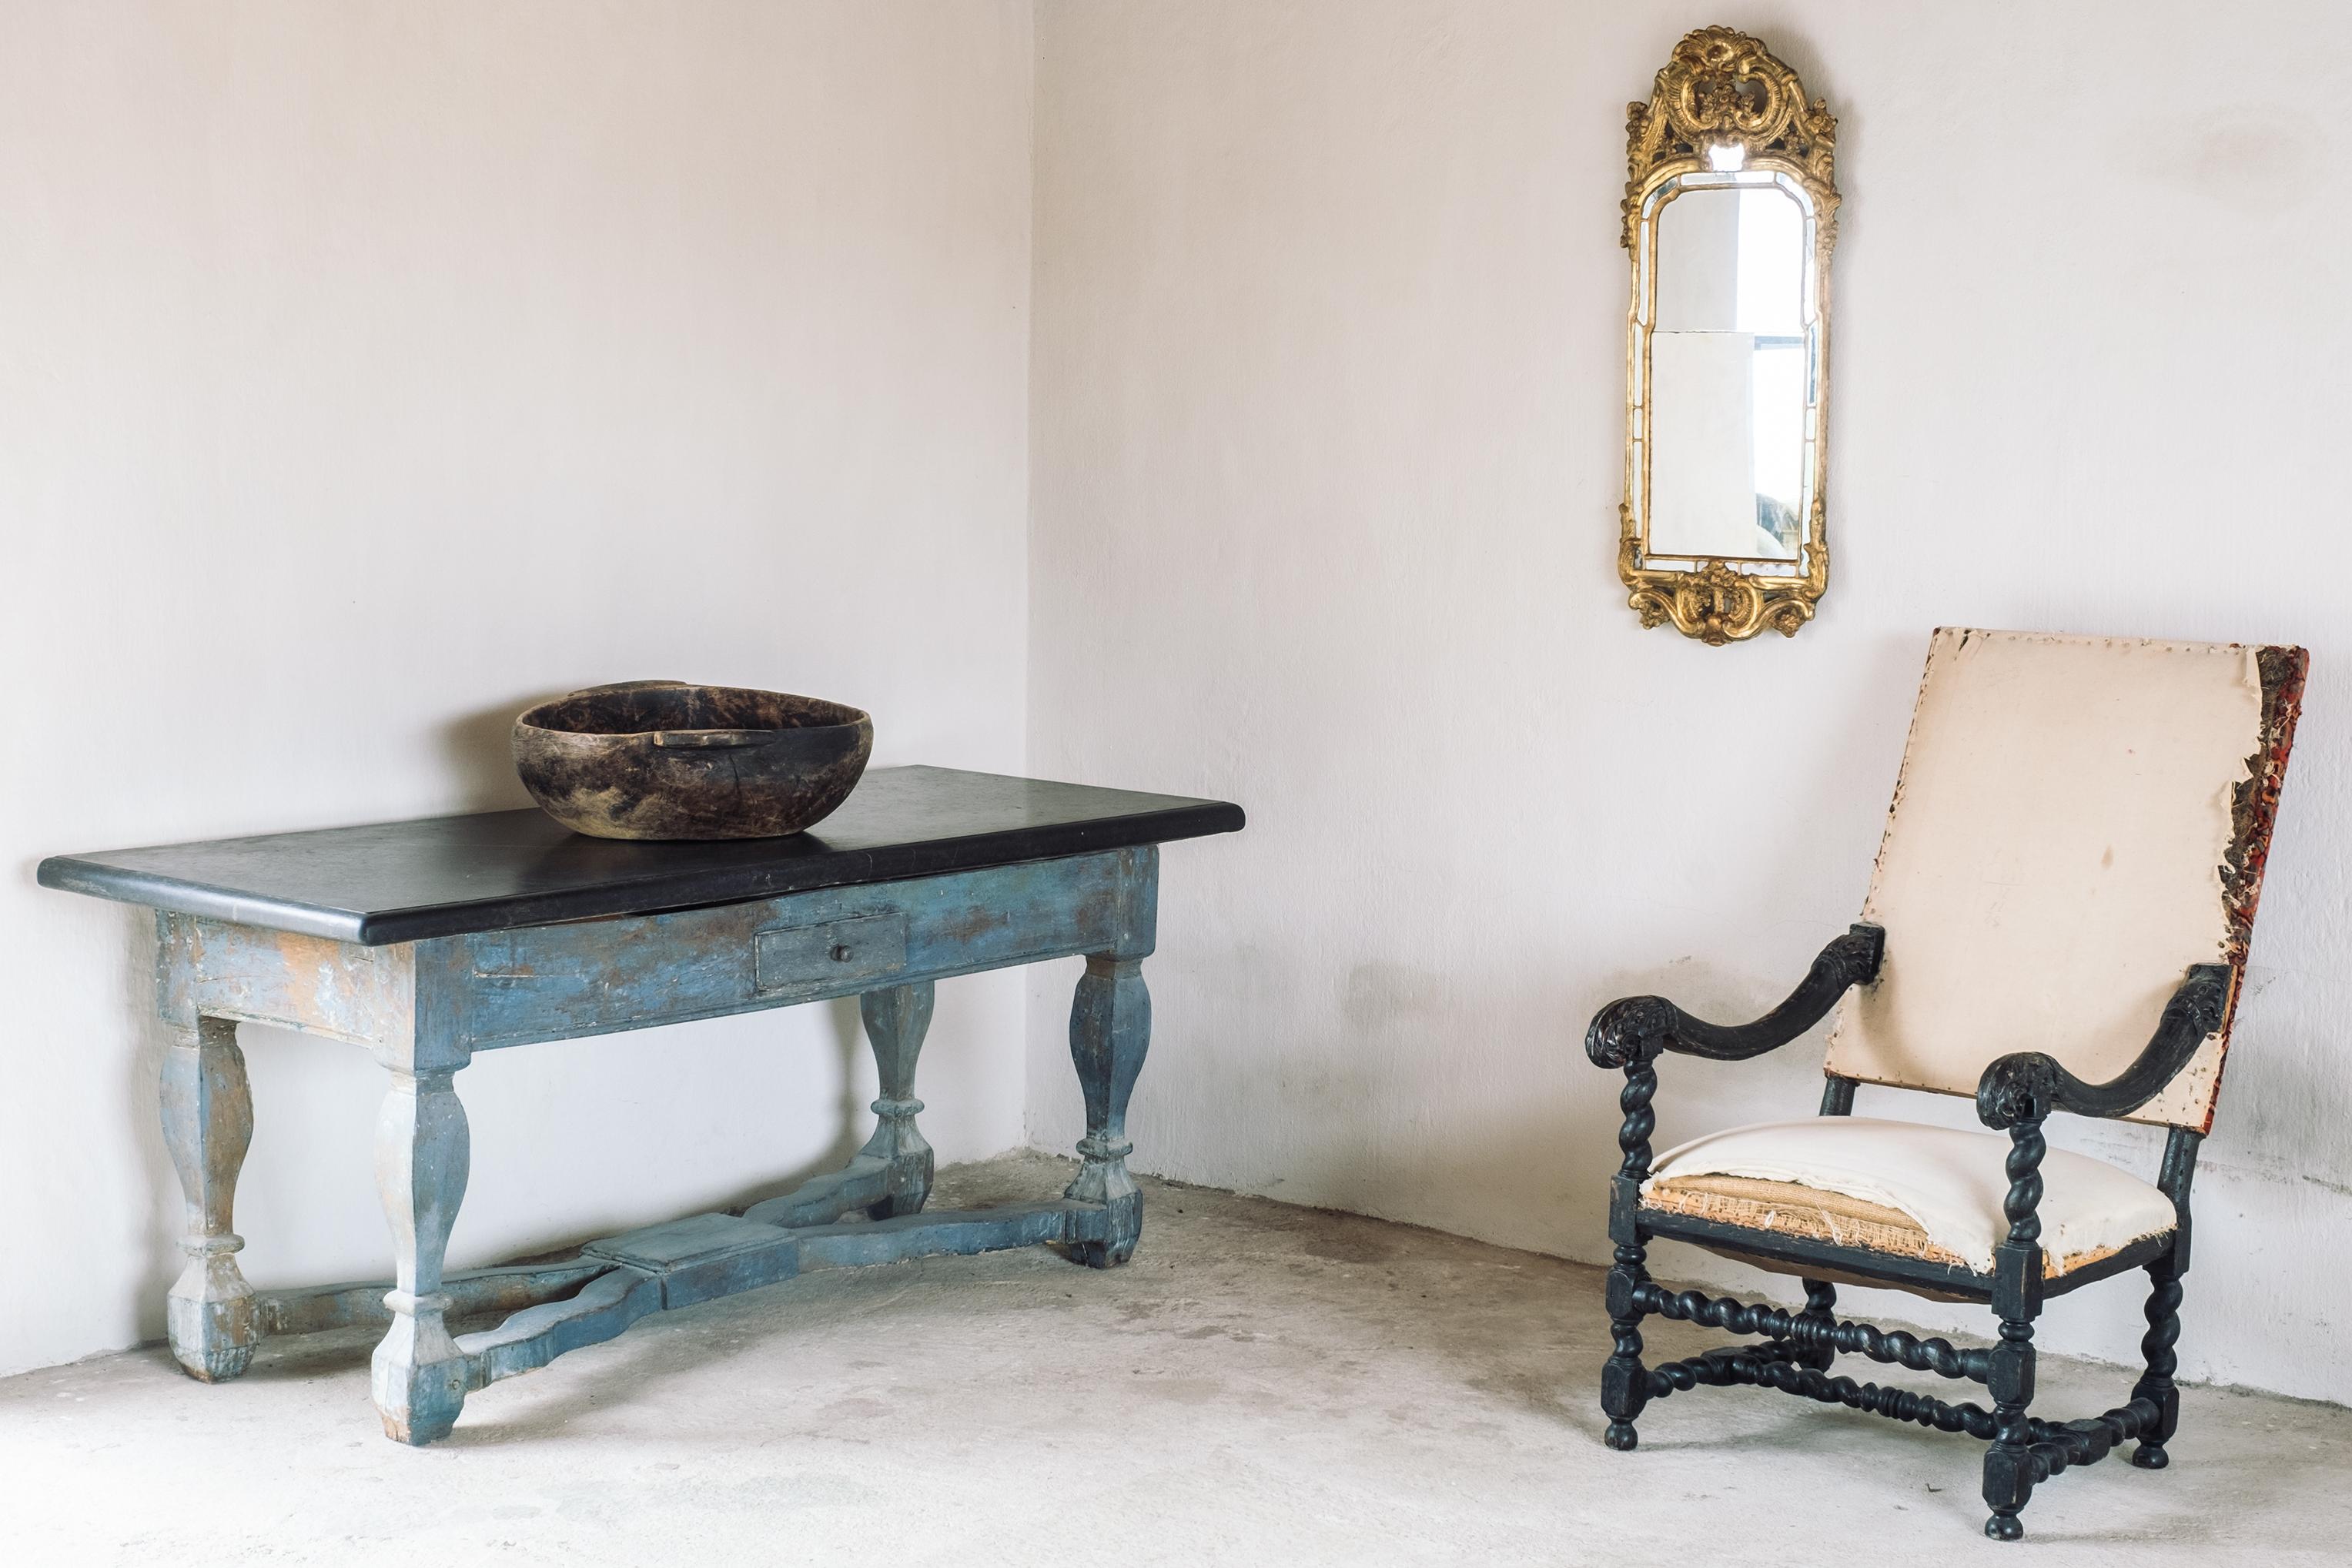 Exceptional 18th century Swedish Baroque stone top table in original blue colour with it’s original large stone slab top with moulded edge. The stone slab is a south Swedish type of grey/blackish limestone, circa 1730, Sweden.